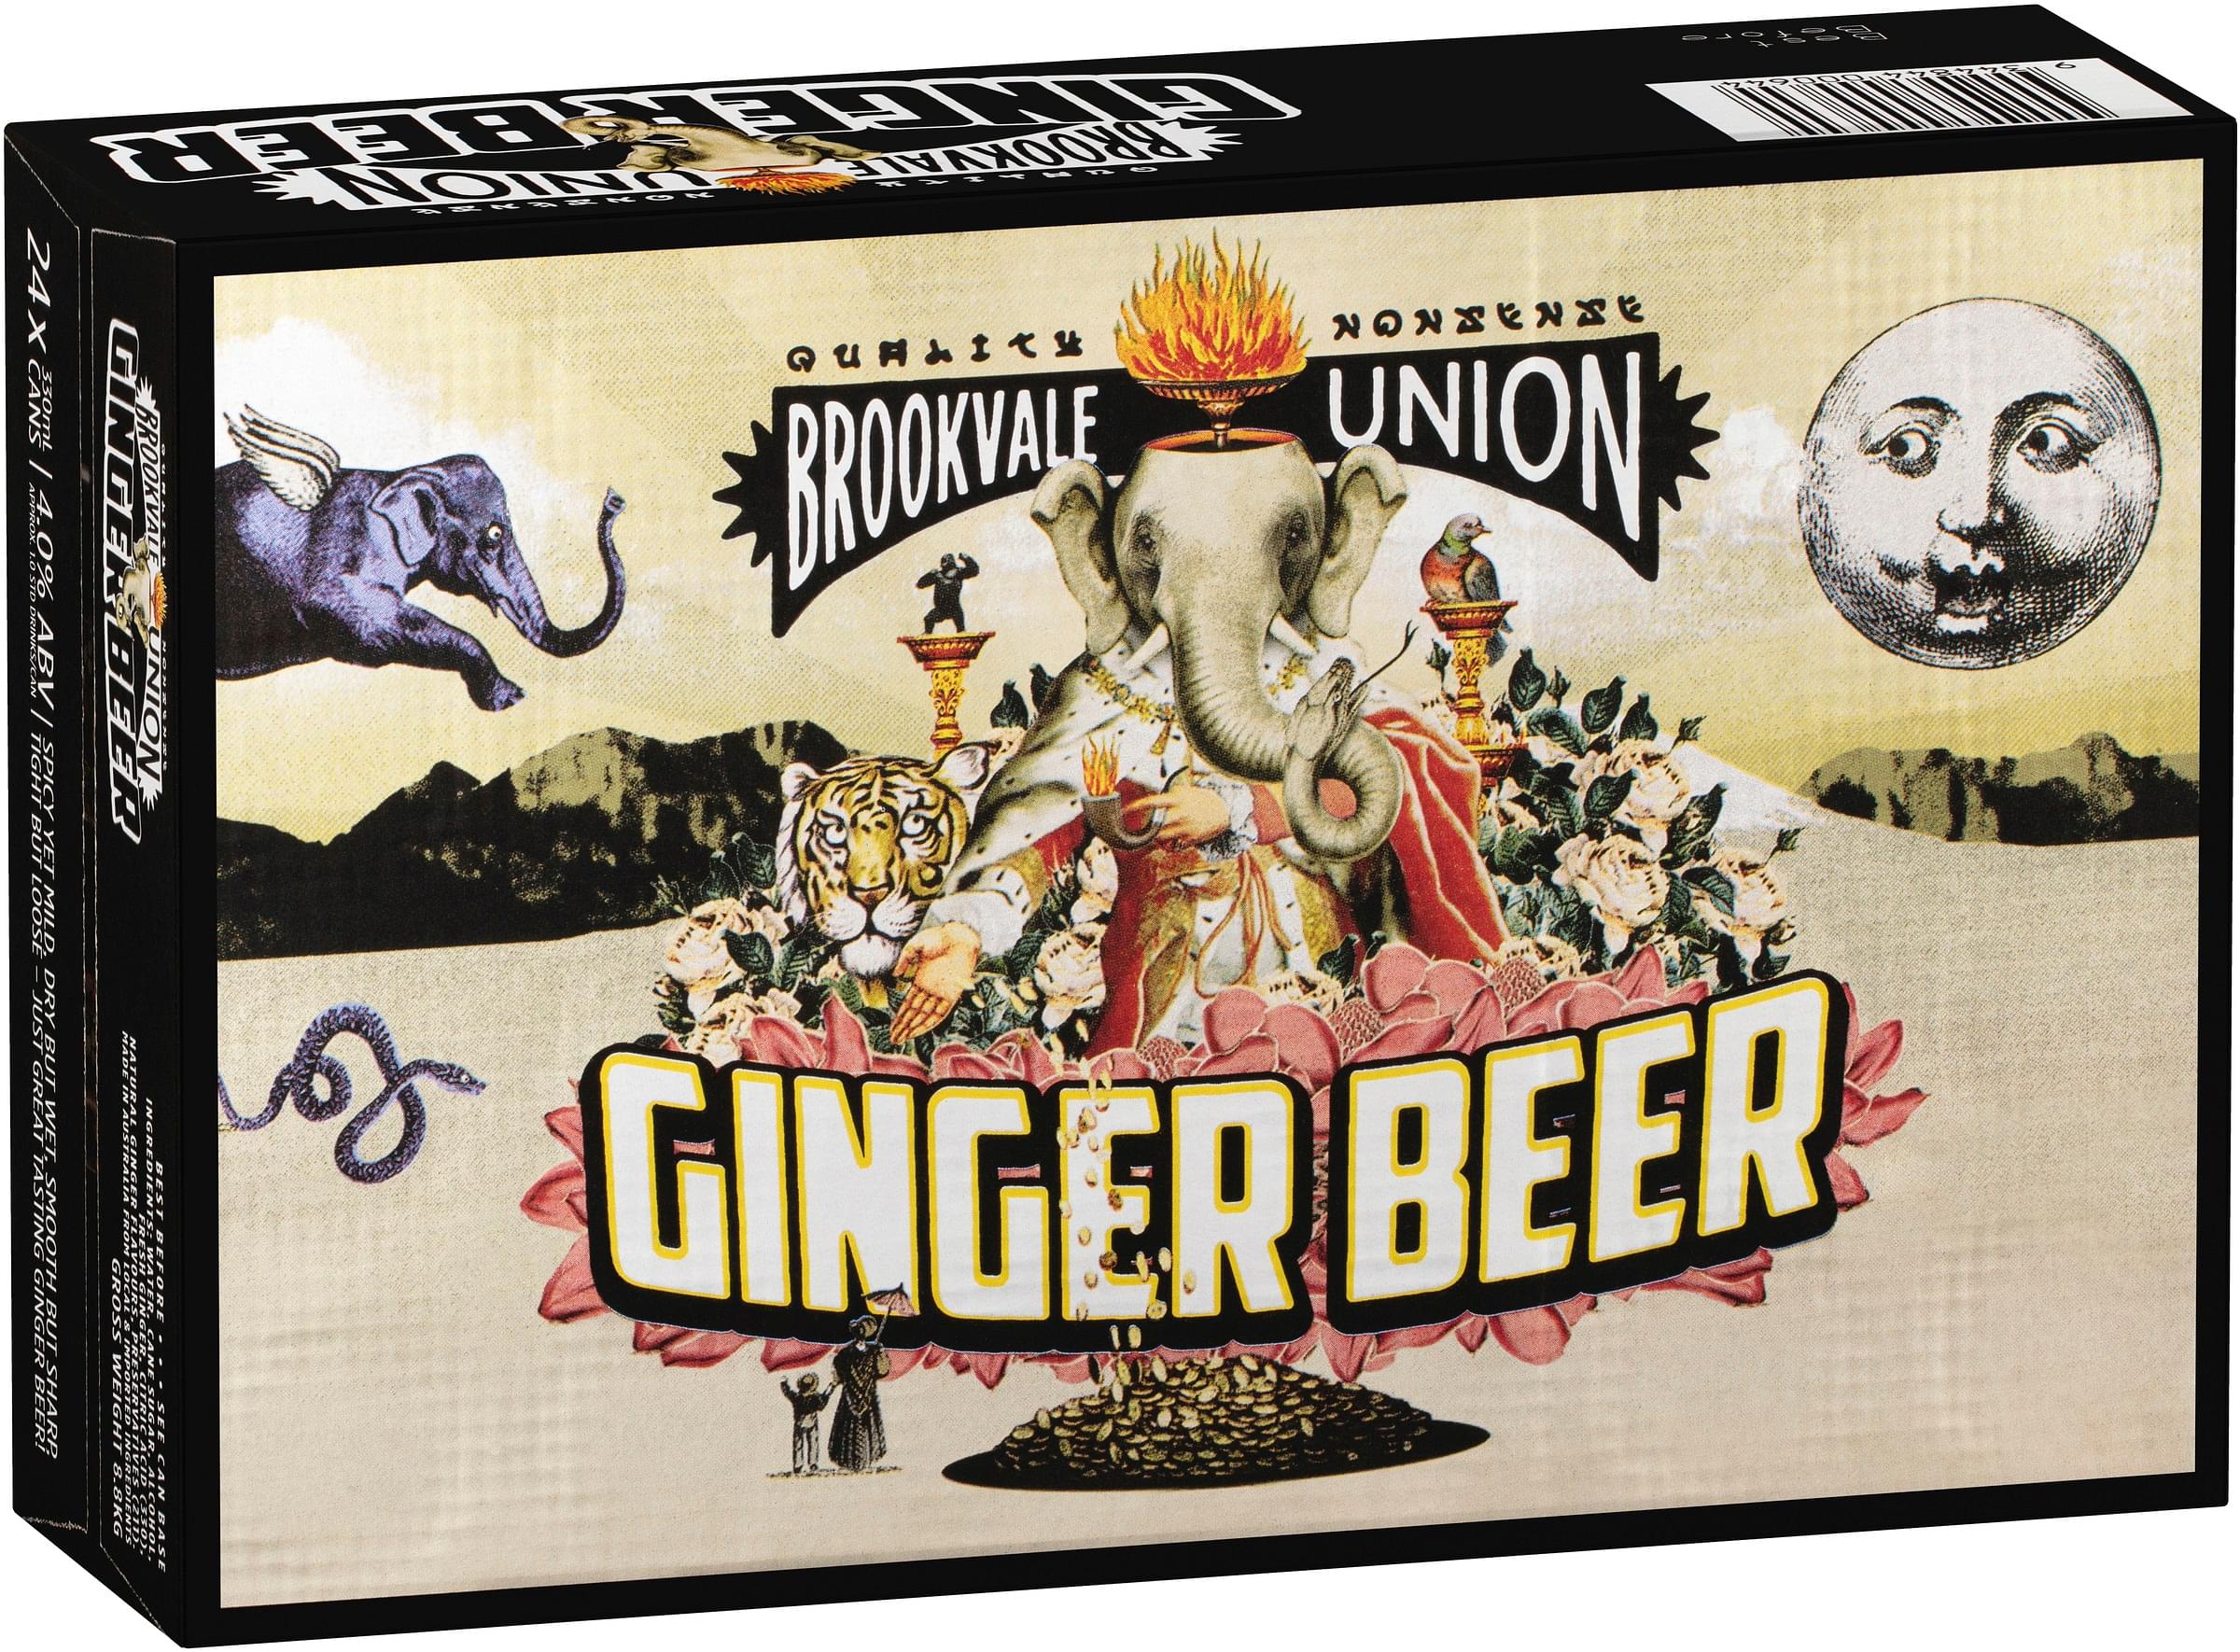 Brookvale Union Ginger Beer (24 x 330ml Cans)